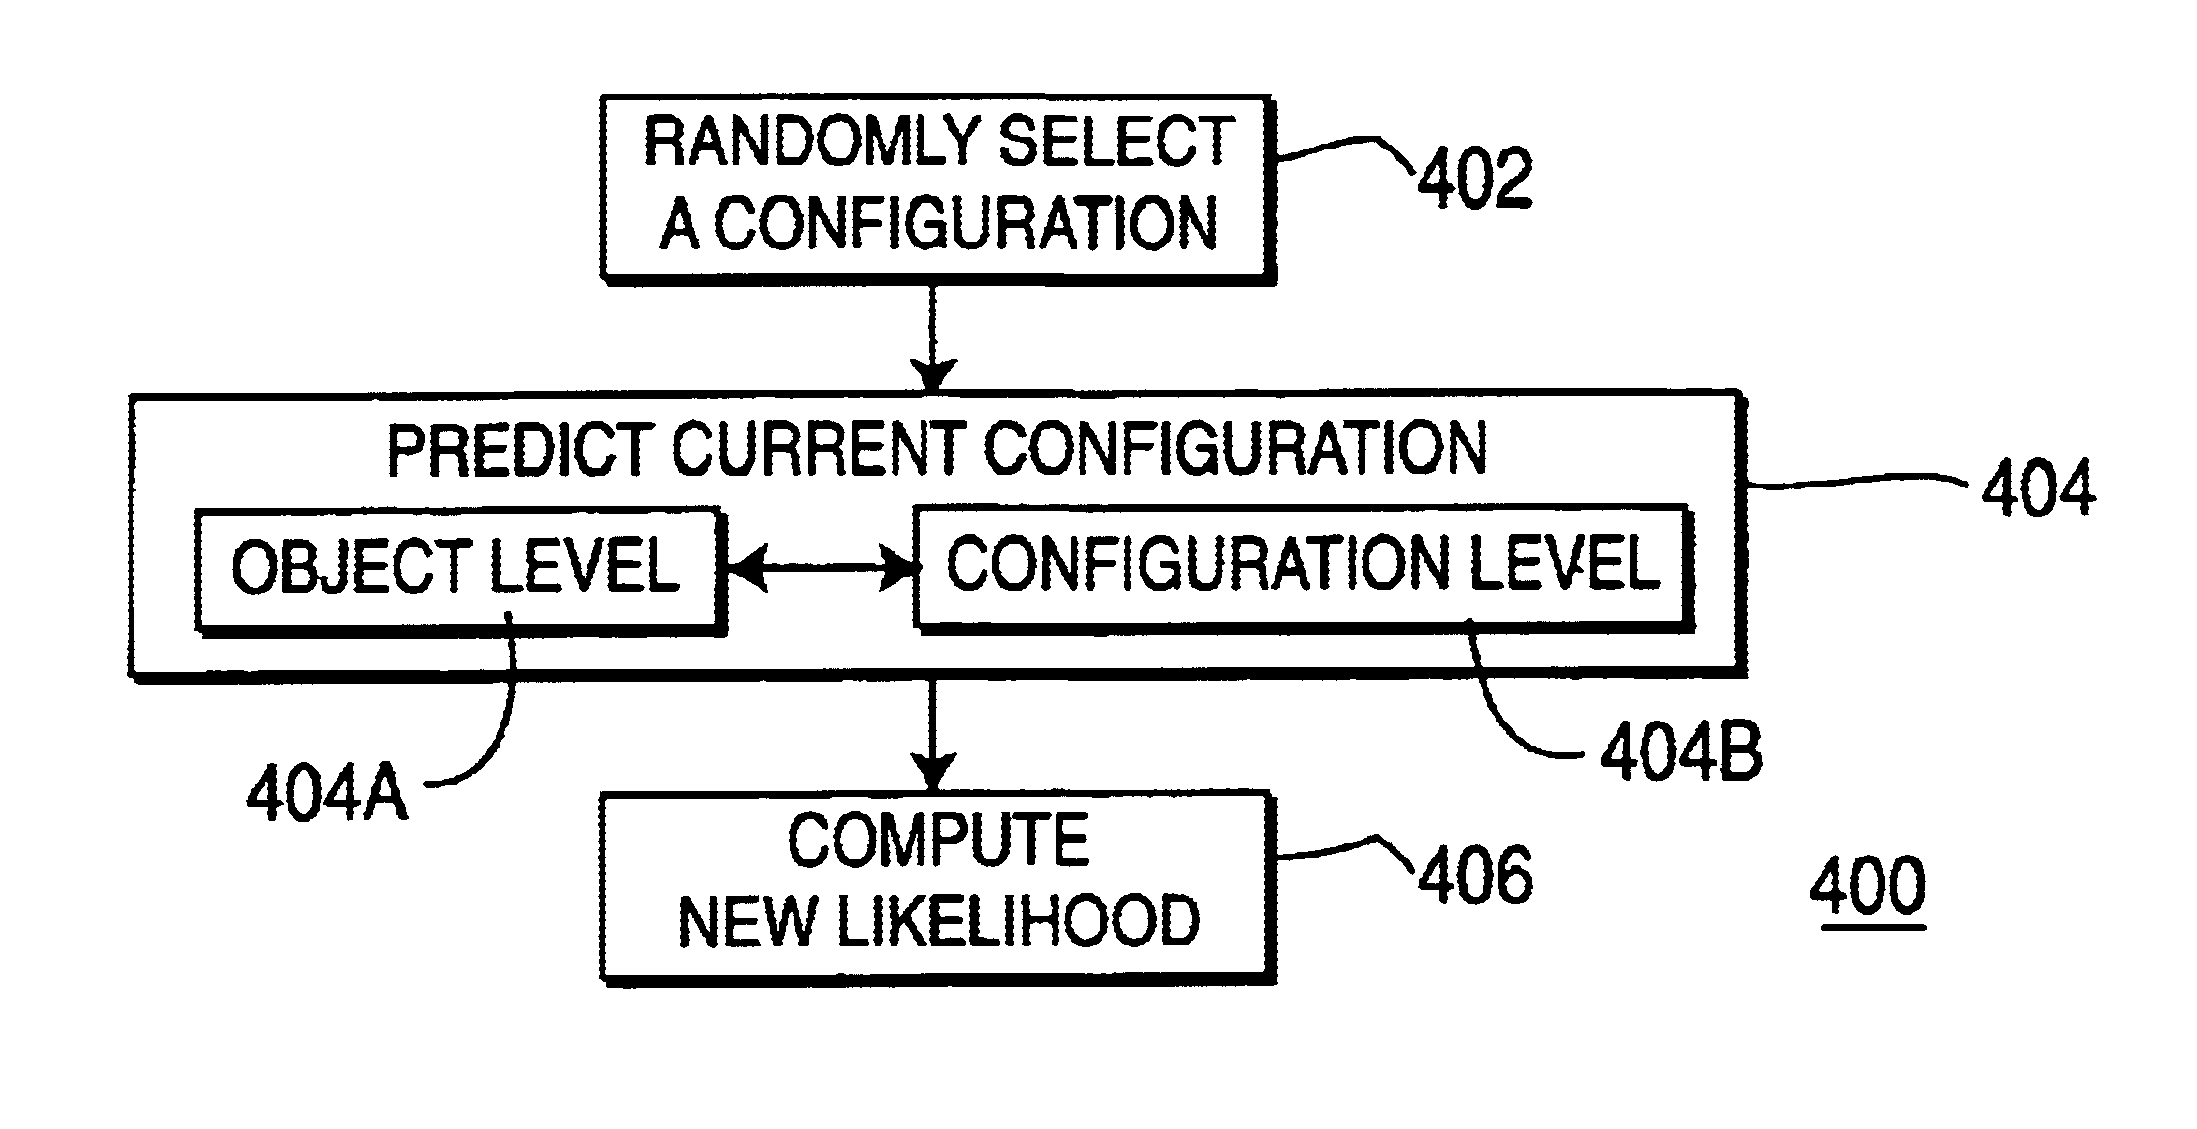 Method and apparatus for tracking multiple objects in a video sequence